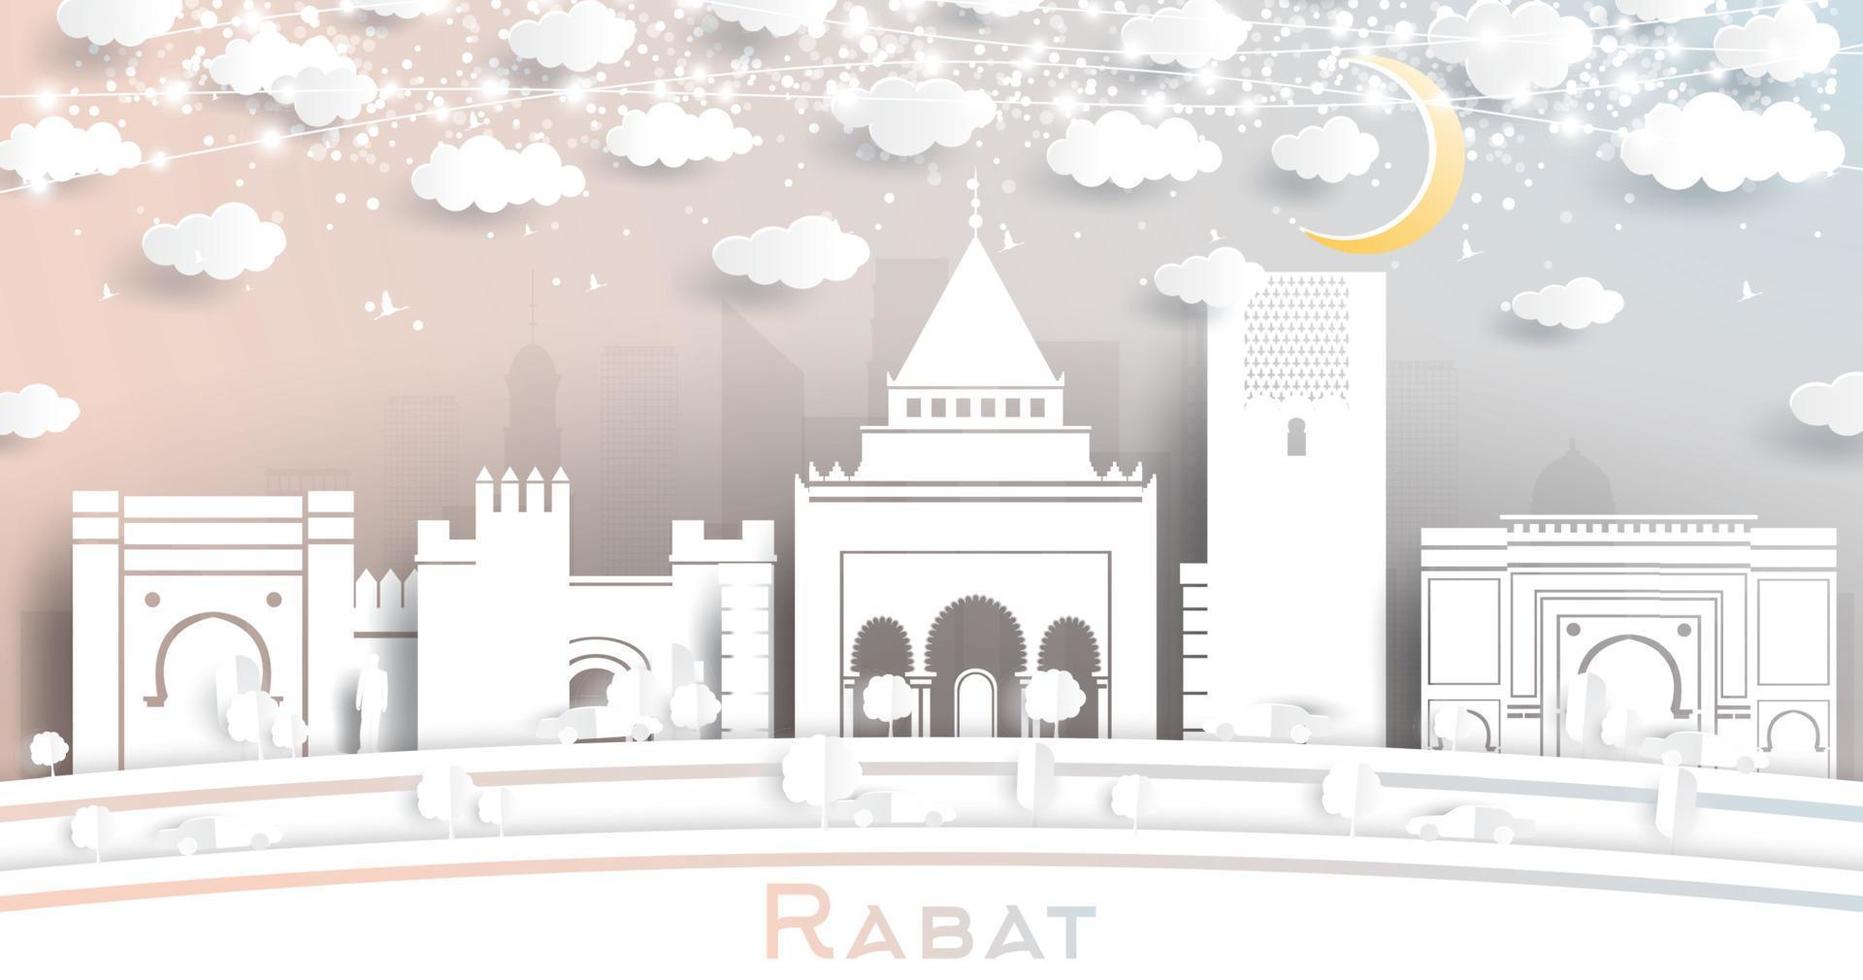 Rabat Morocco City Skyline in Paper Cut Style with White Buildings, Moon and Neon Garland. vector